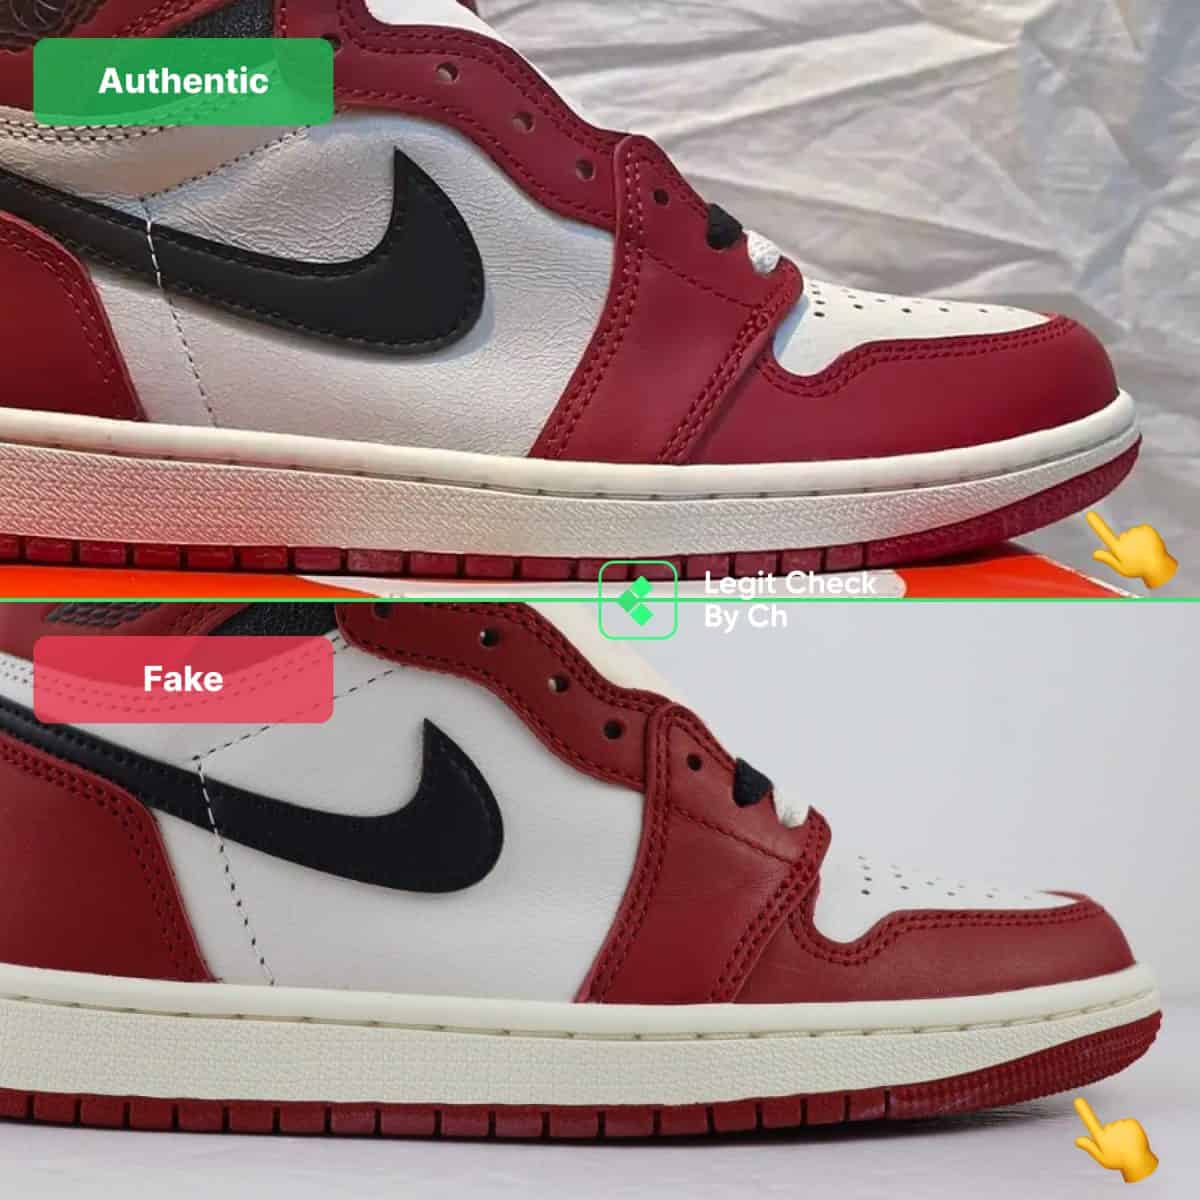 How To Spot Fake Air Jordan 1 Lost And Found